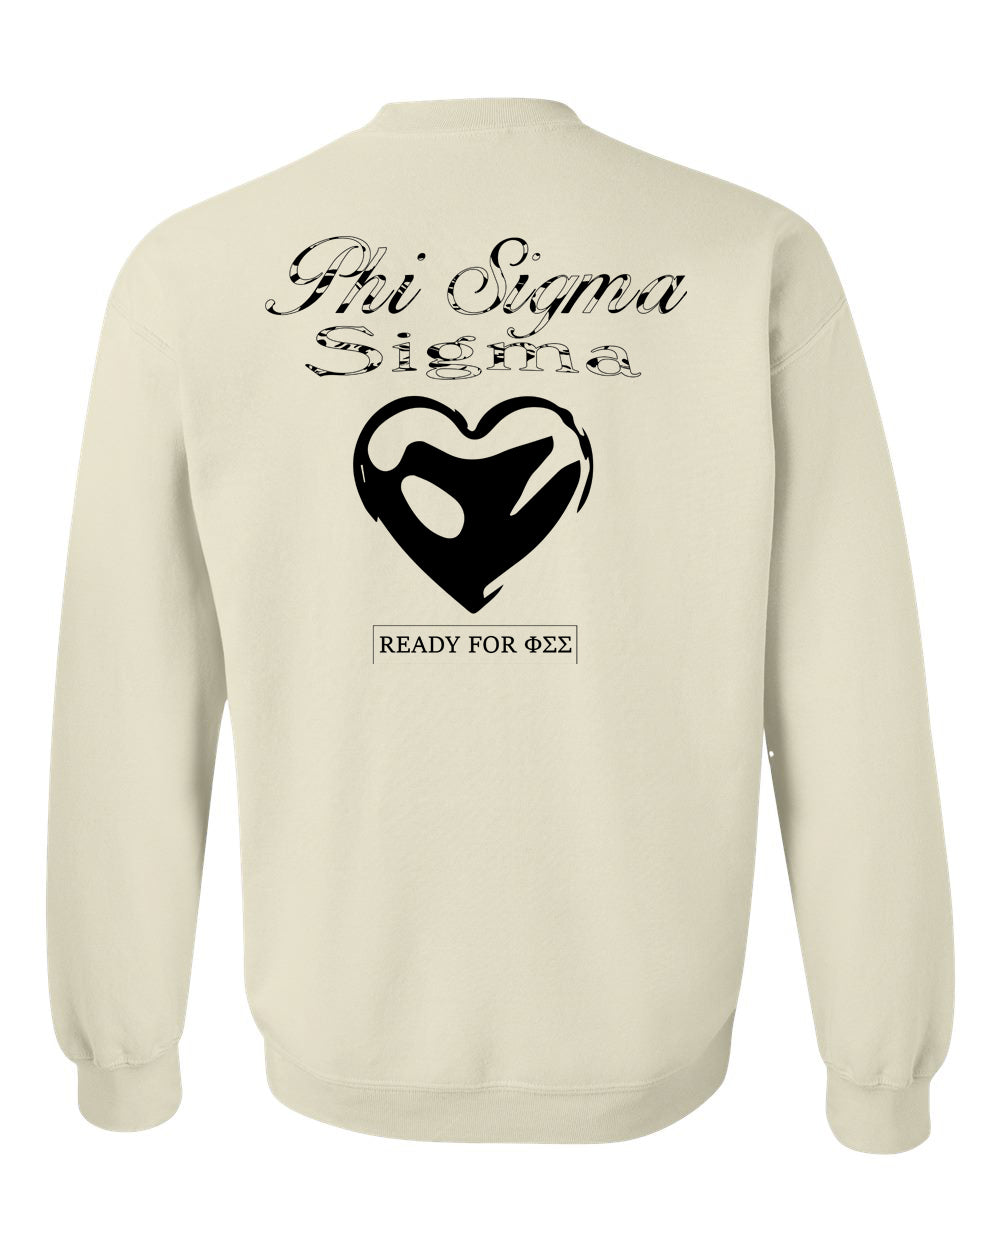 a white sweatshirt with a black heart on it